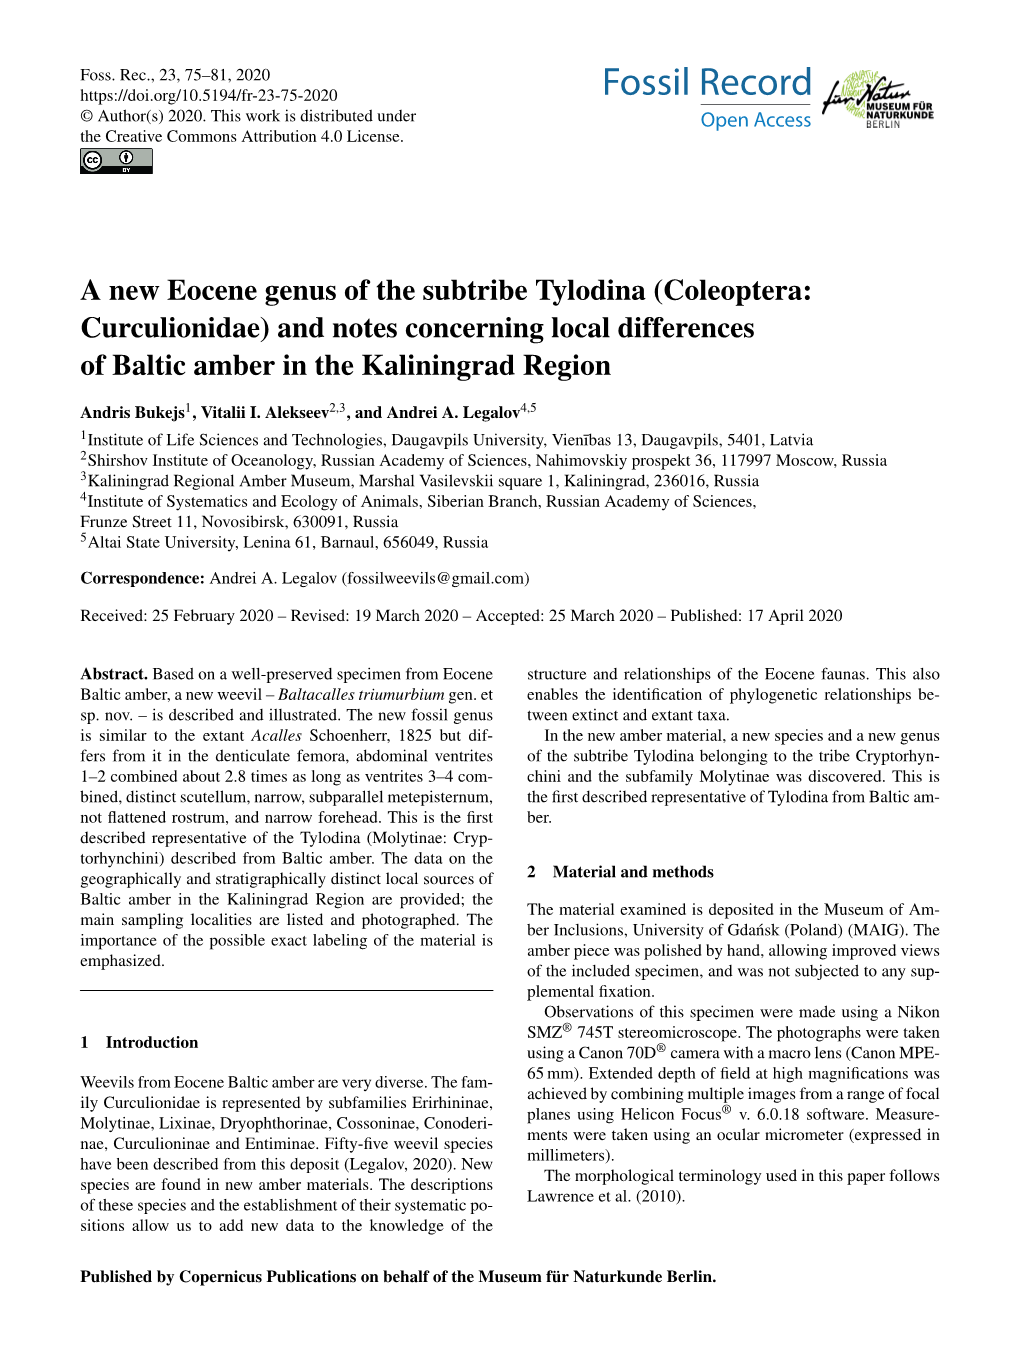 A New Eocene Genus of the Subtribe Tylodina (Coleoptera: Curculionidae) and Notes Concerning Local Differences of Baltic Amber in the Kaliningrad Region